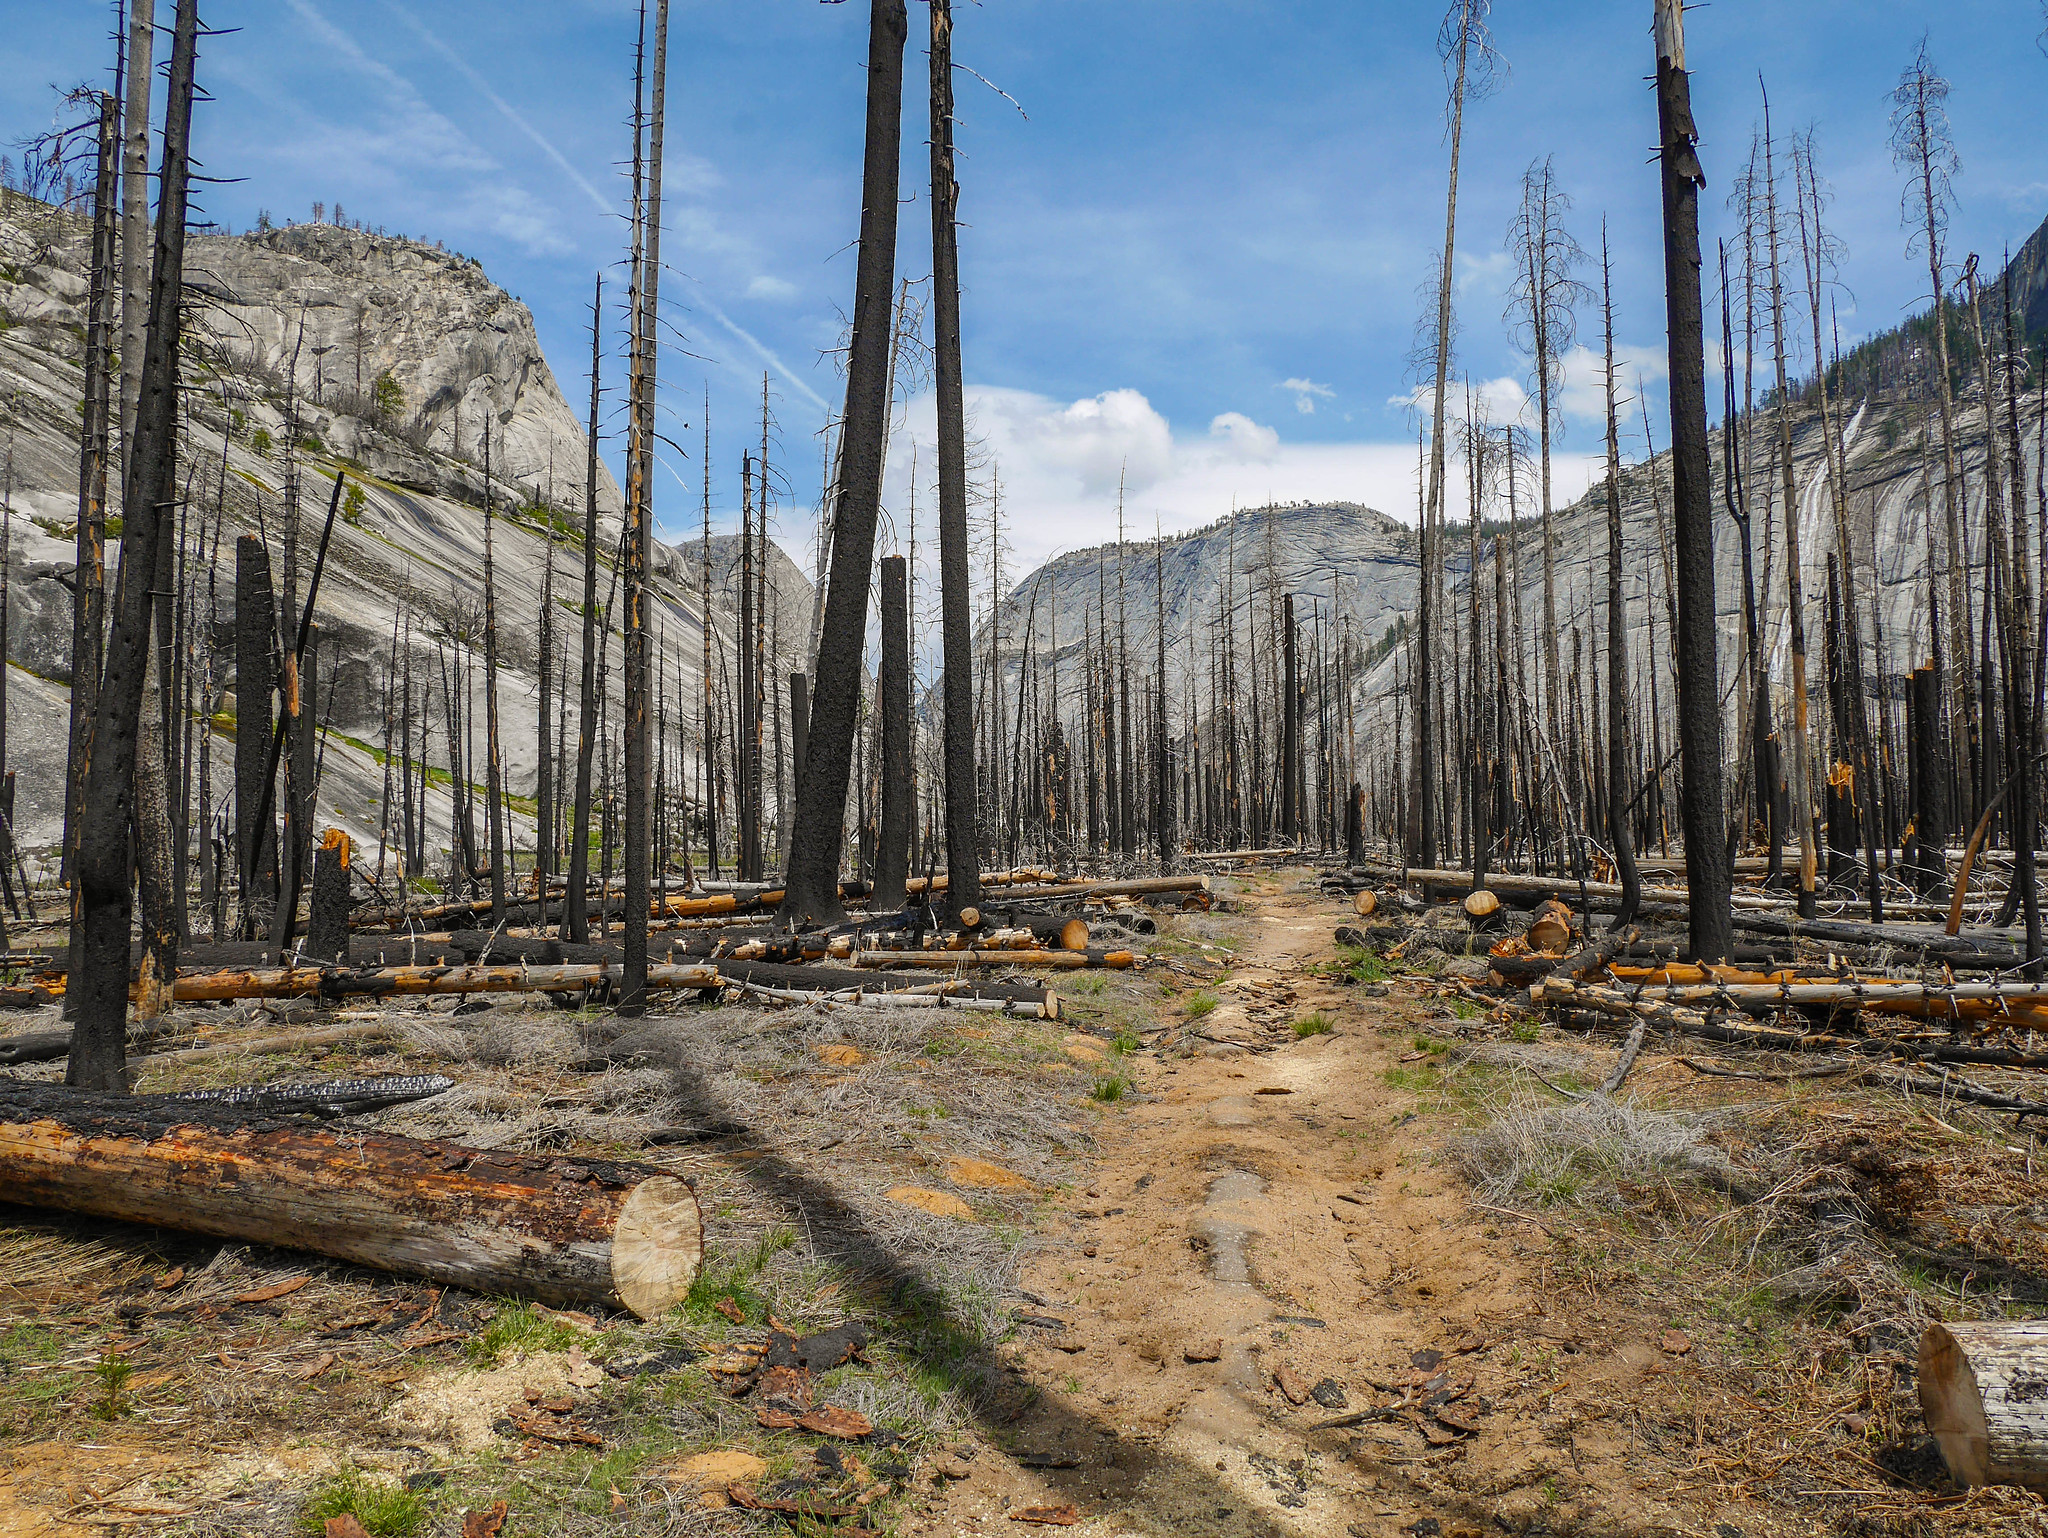 Burned areas in Little Yosemite Valley are somewhat apocalyptic but let you see the canyon